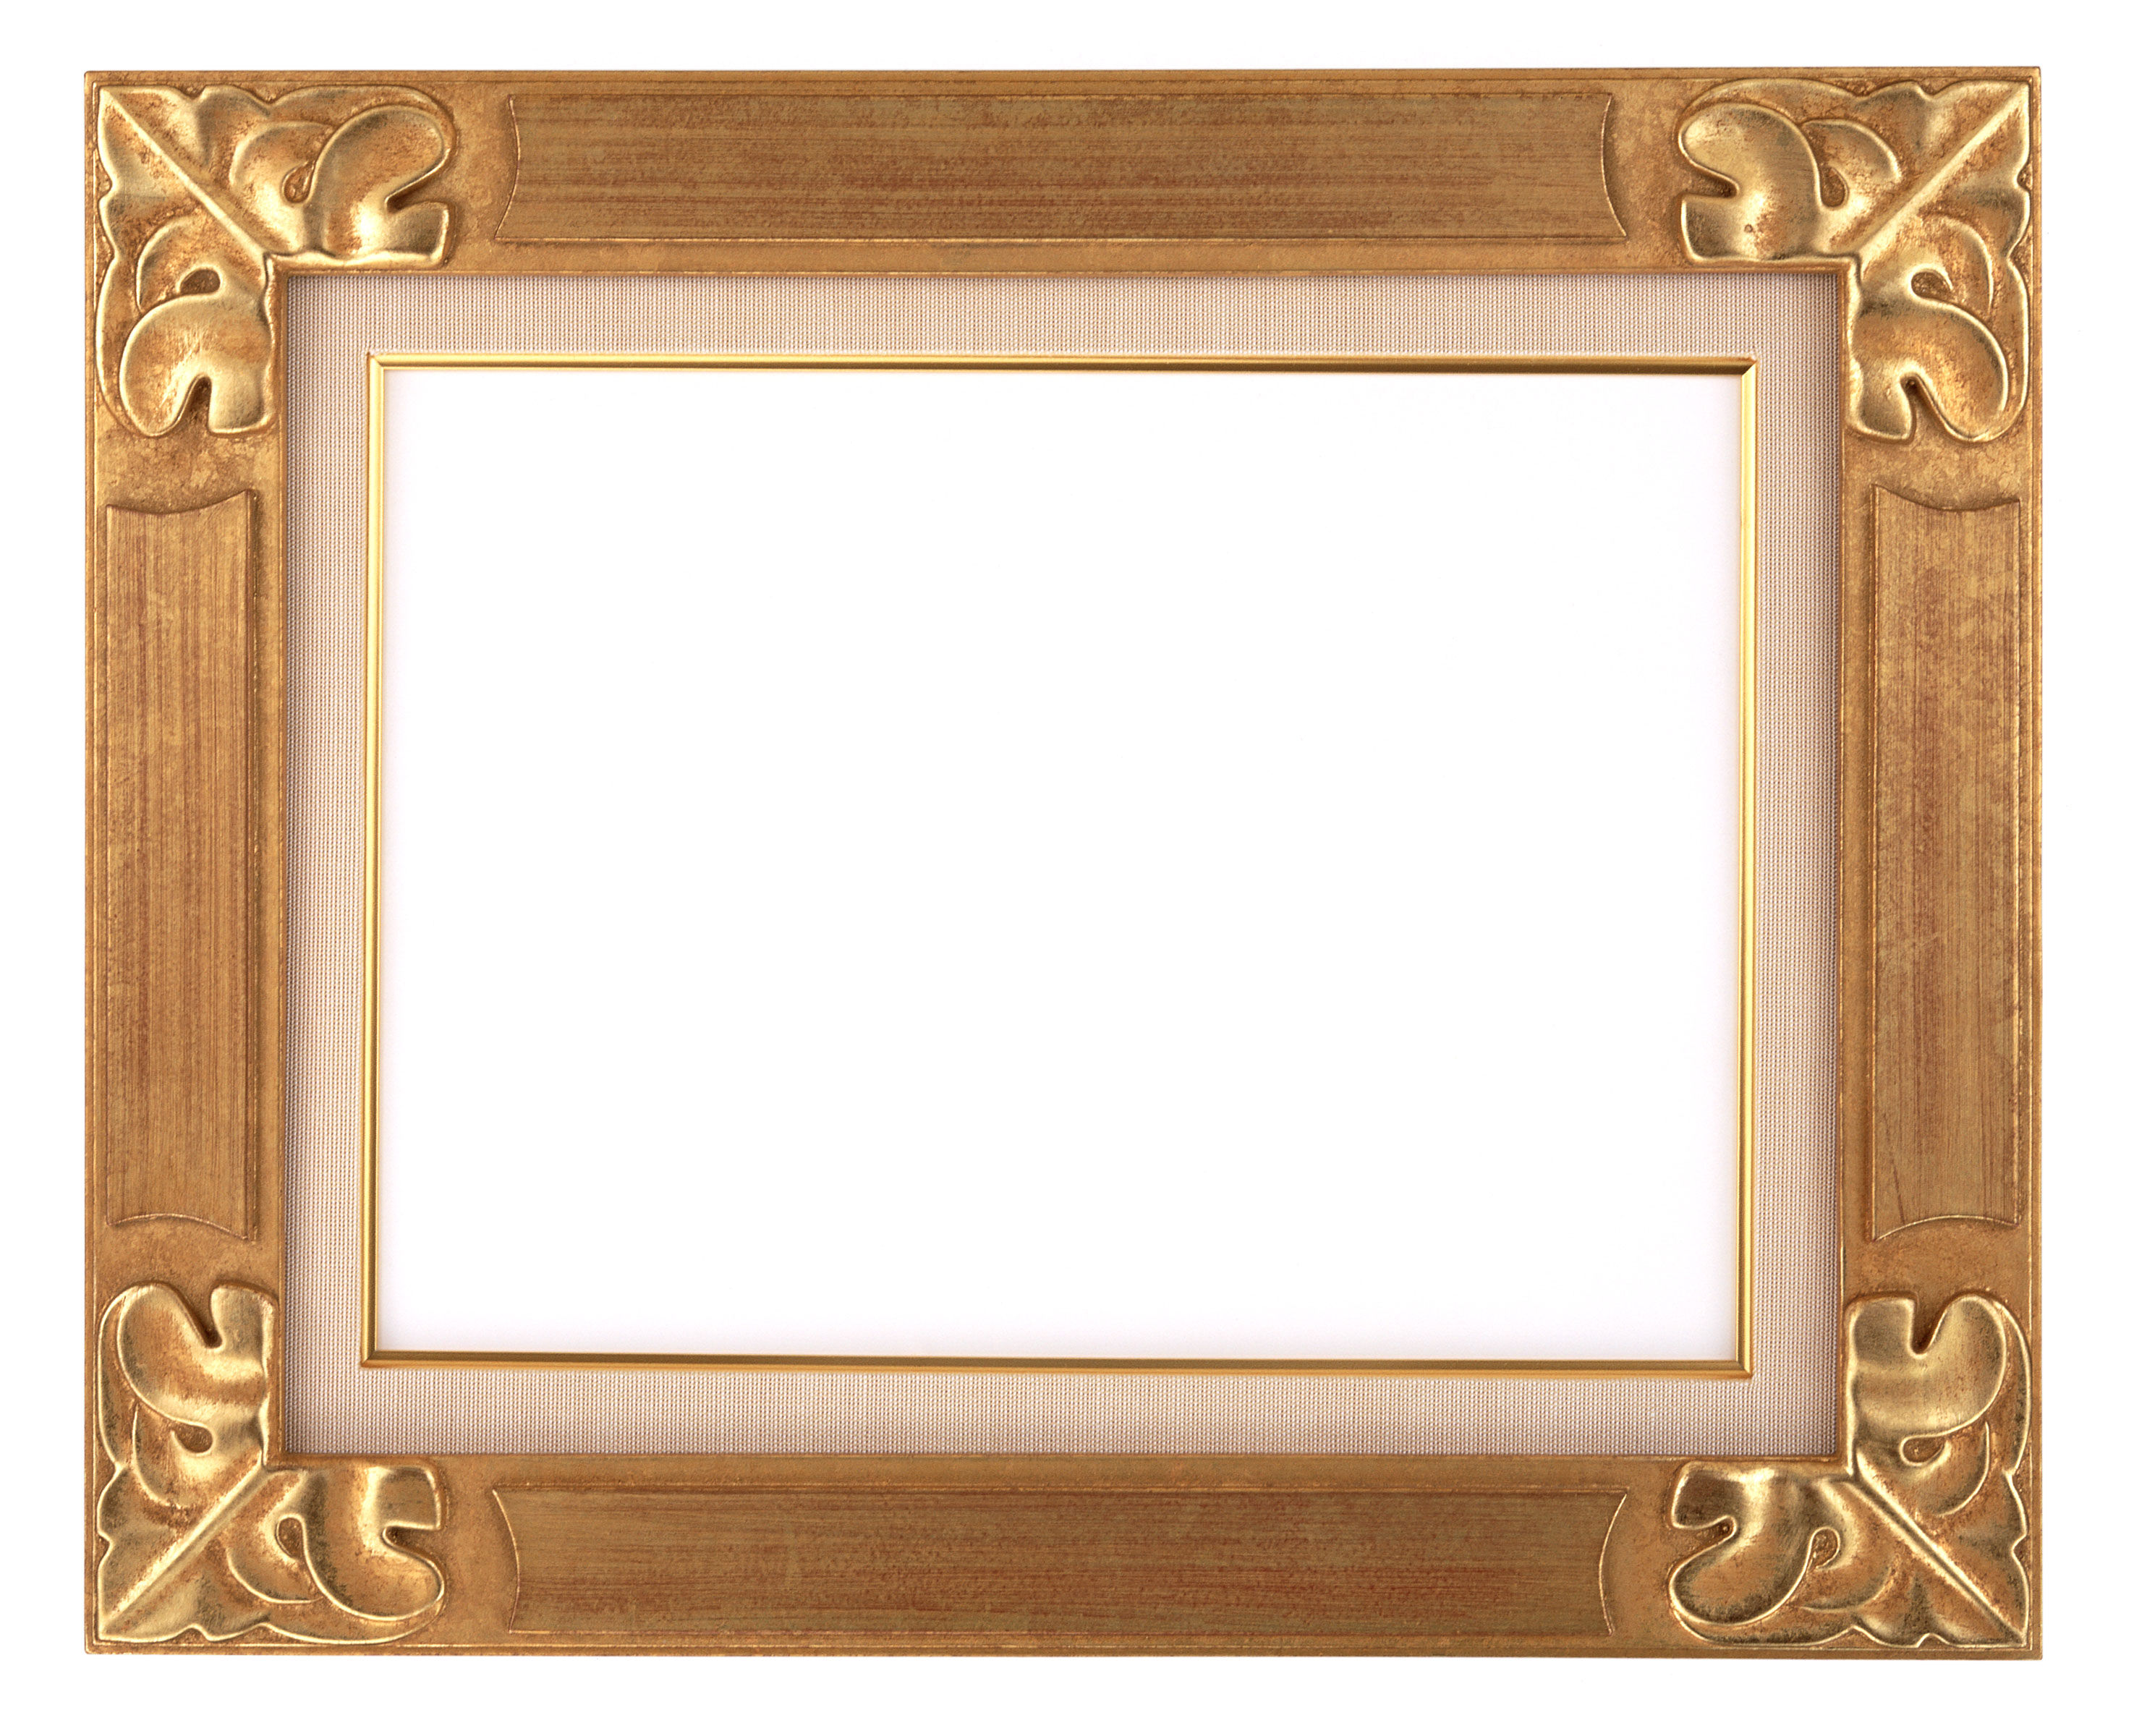 Wedding Frames Wallpapers High Quality Download Free